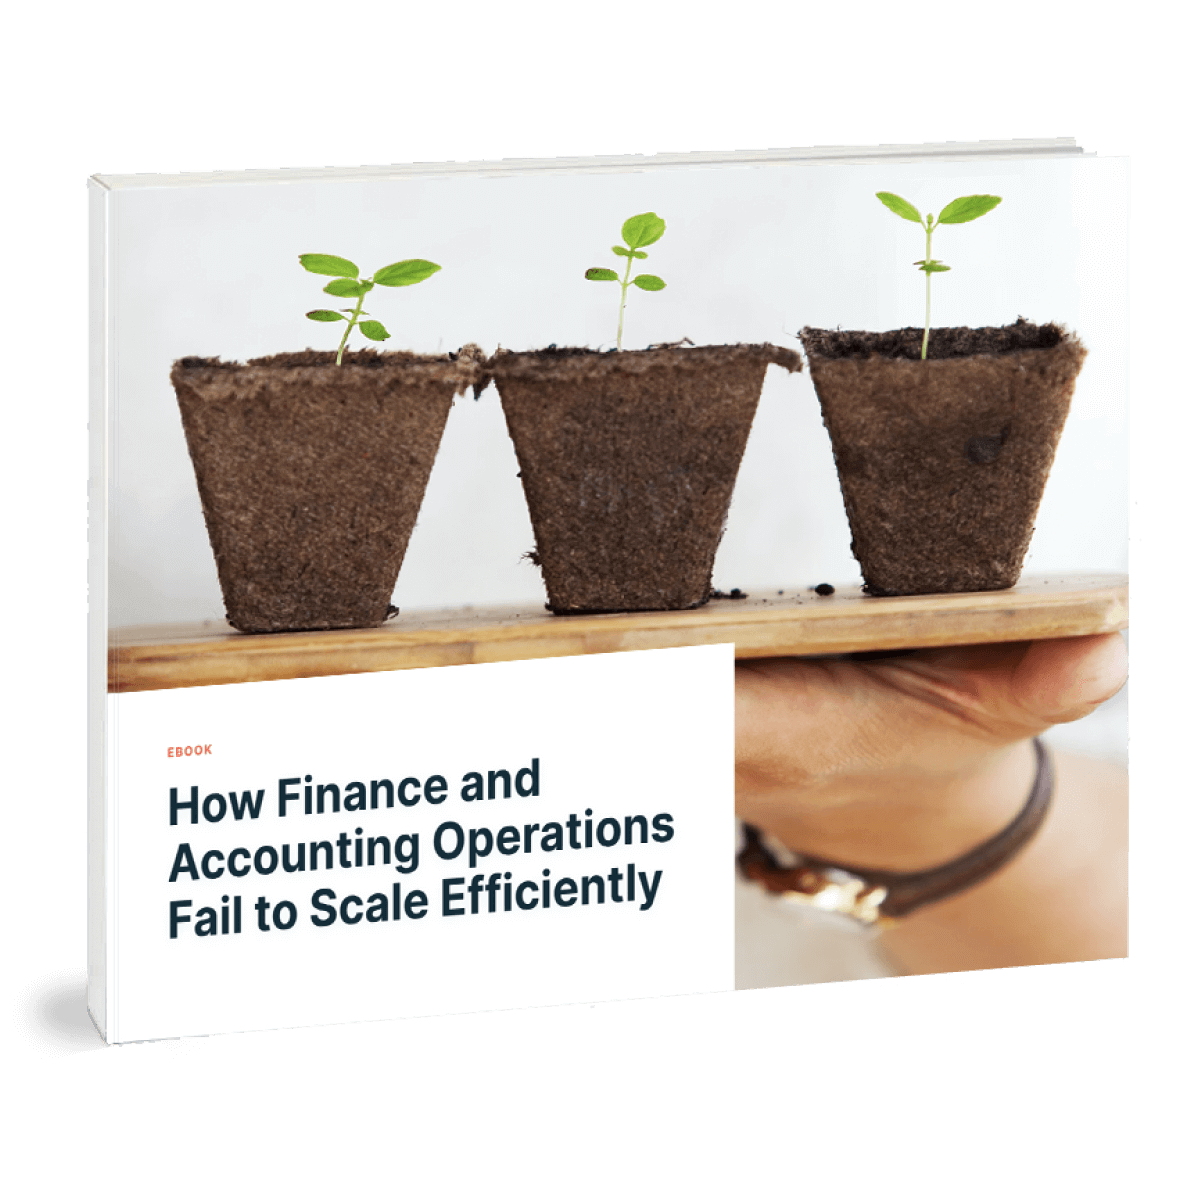 How Finance and Accounting Operations Fail to Scale Efficiently.